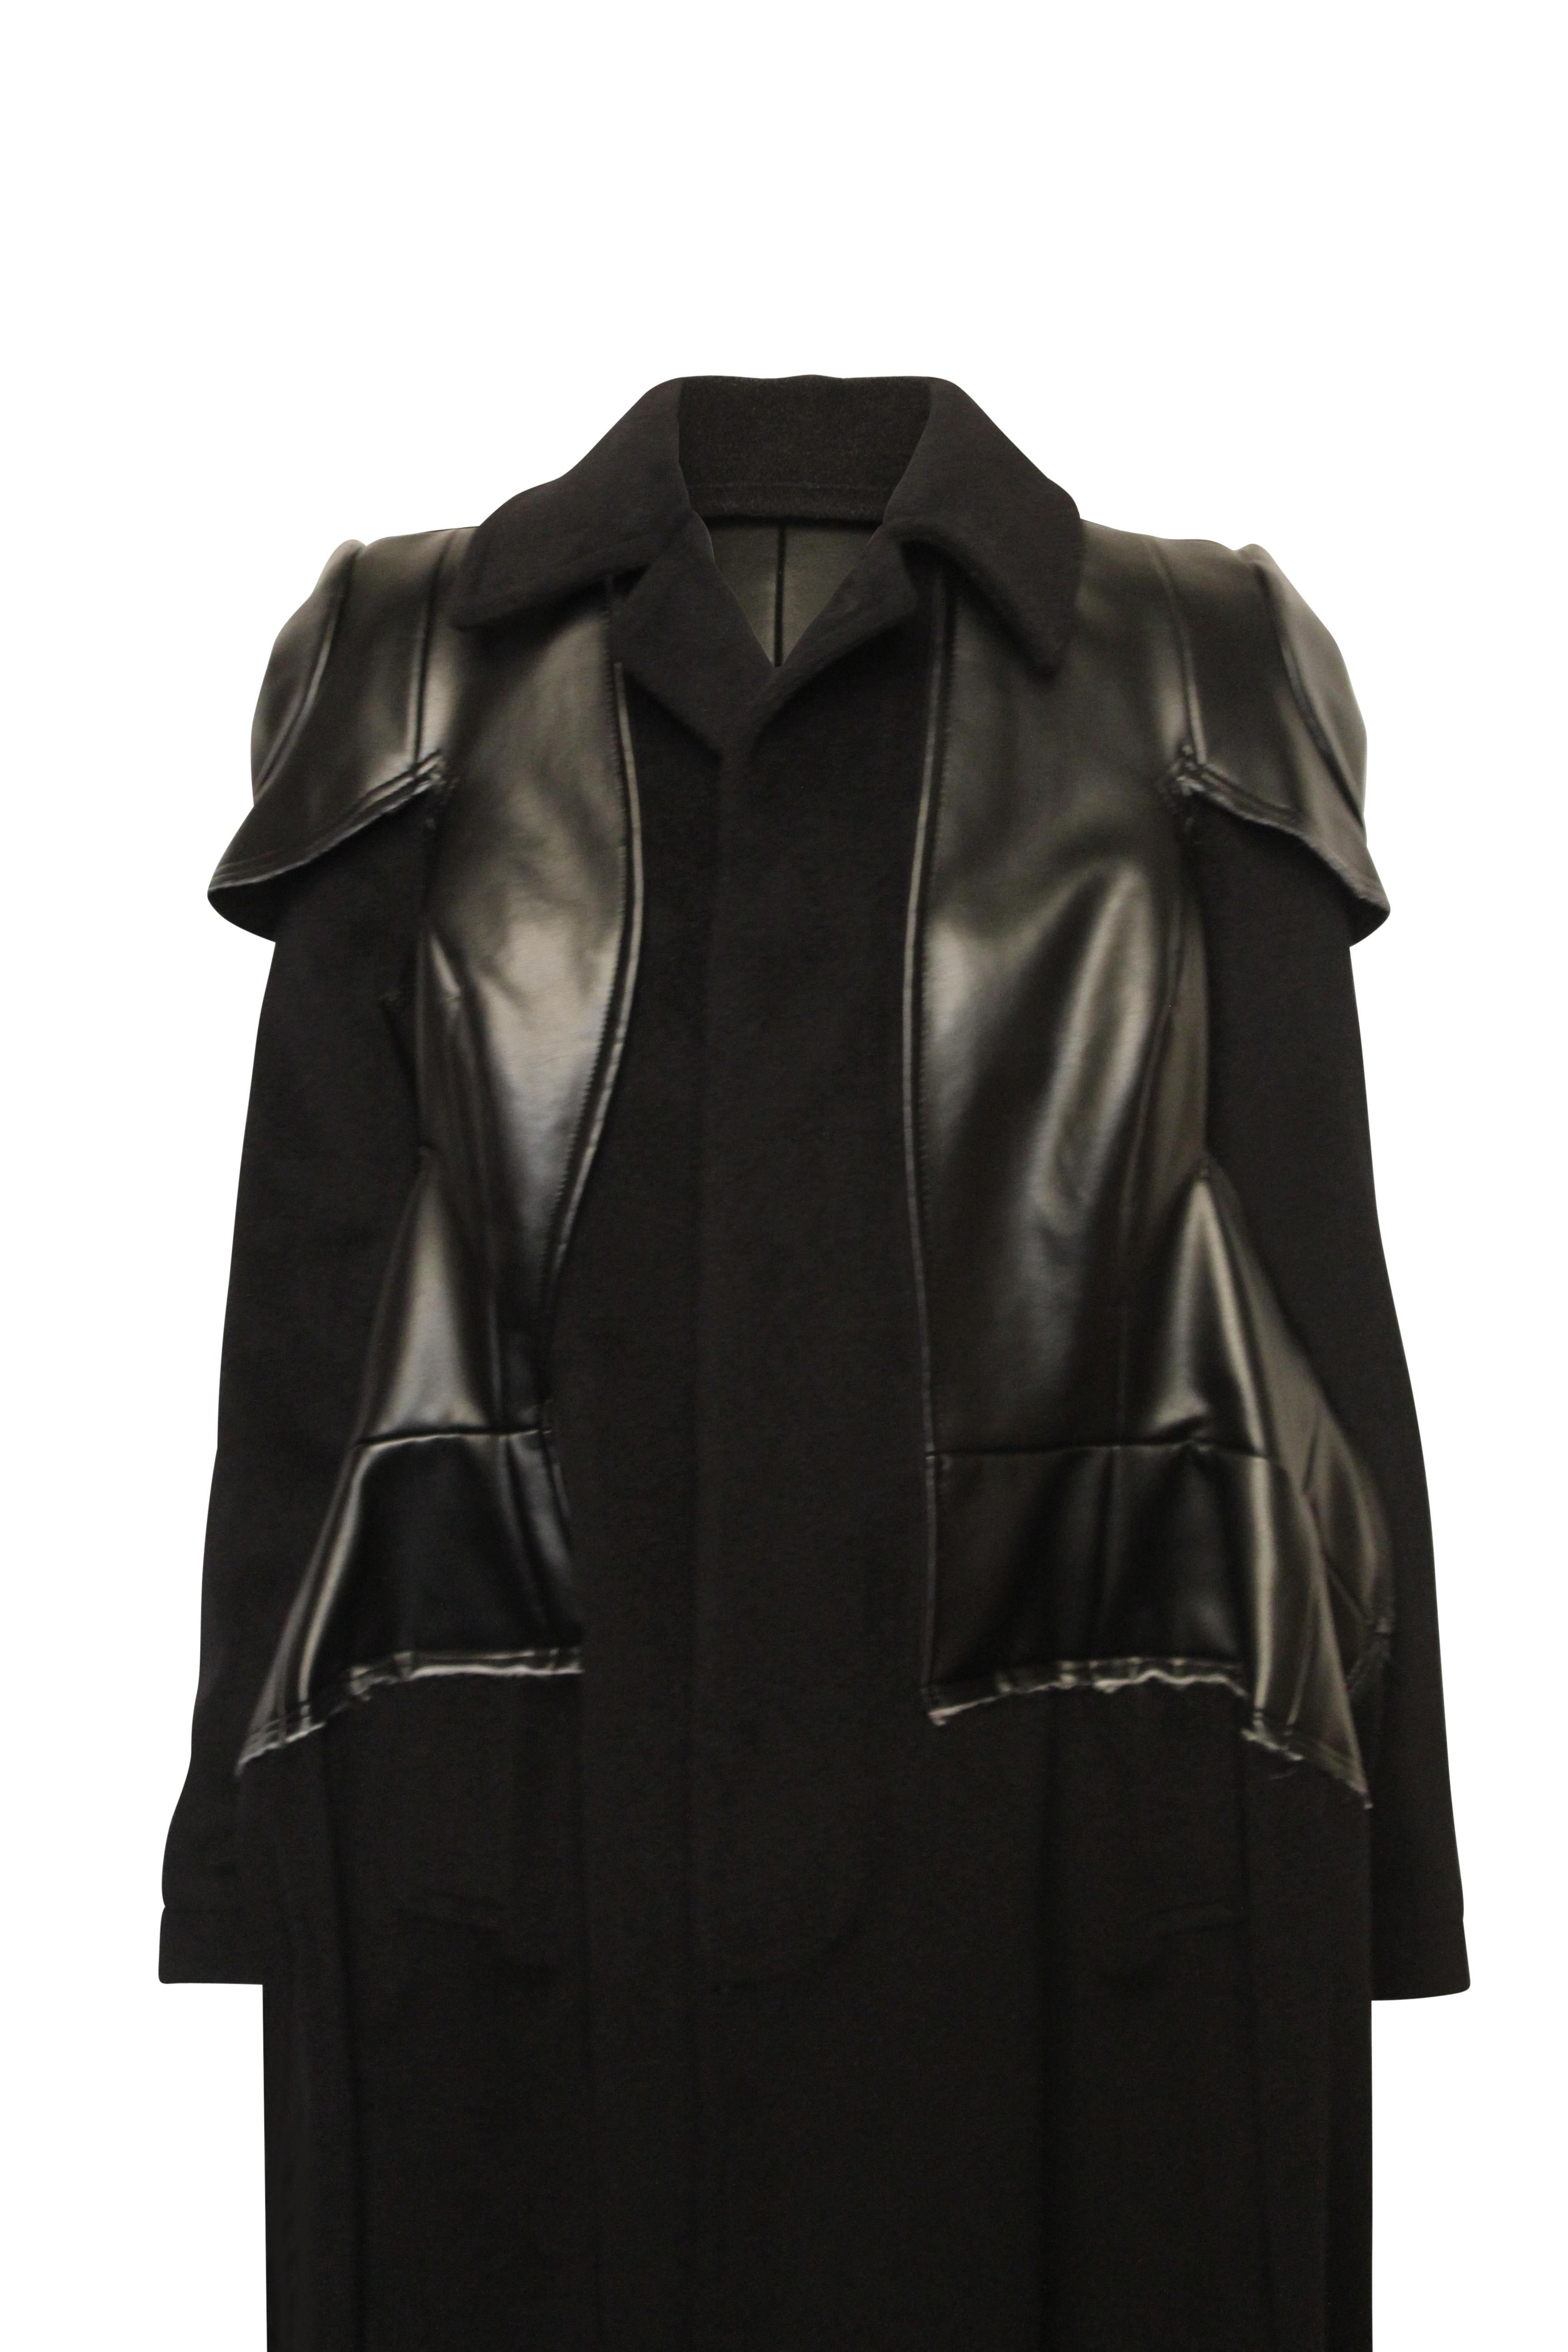 Comme des Garçons 2017 black sculptural coat made from incredibly soft angora and wool. Faux leather detail creates a sharp structure accentuating the shoulders and upper body and a beautiful peplum shape is created at the hips.
Made in Japan.
Size